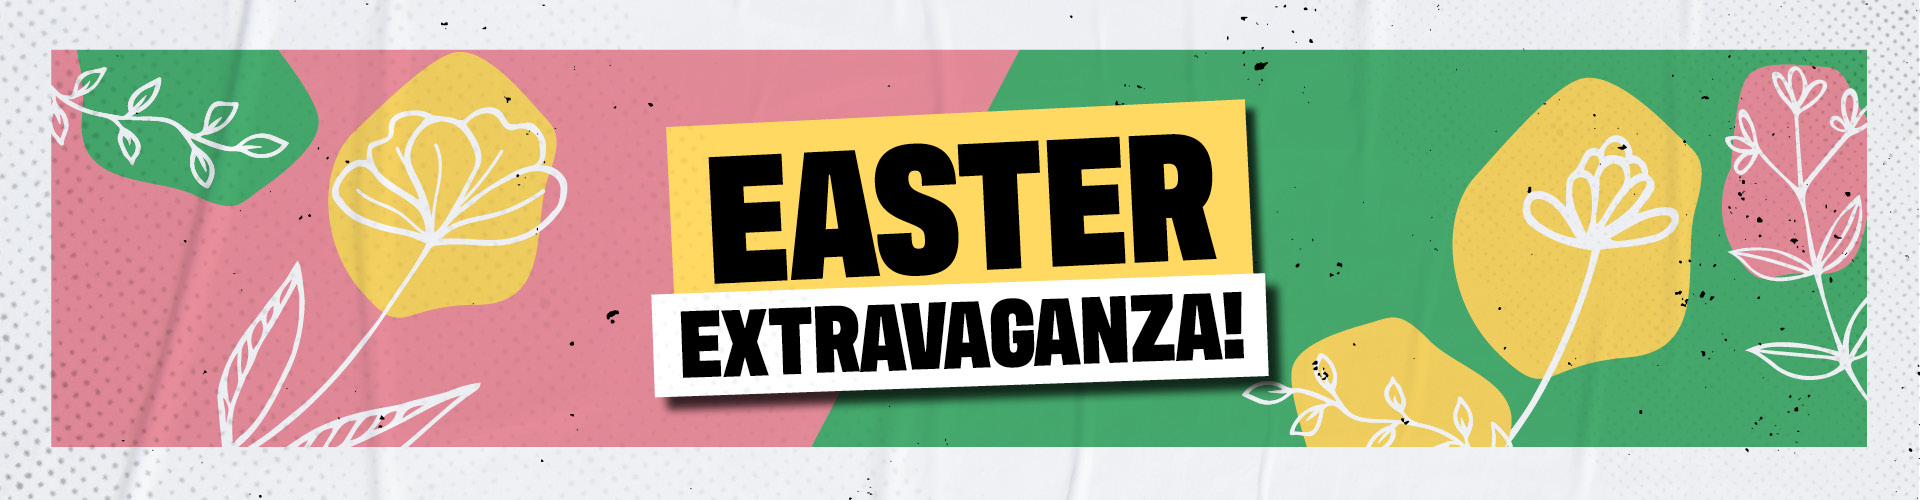 Easter Extravaganza - Make a Booking Today